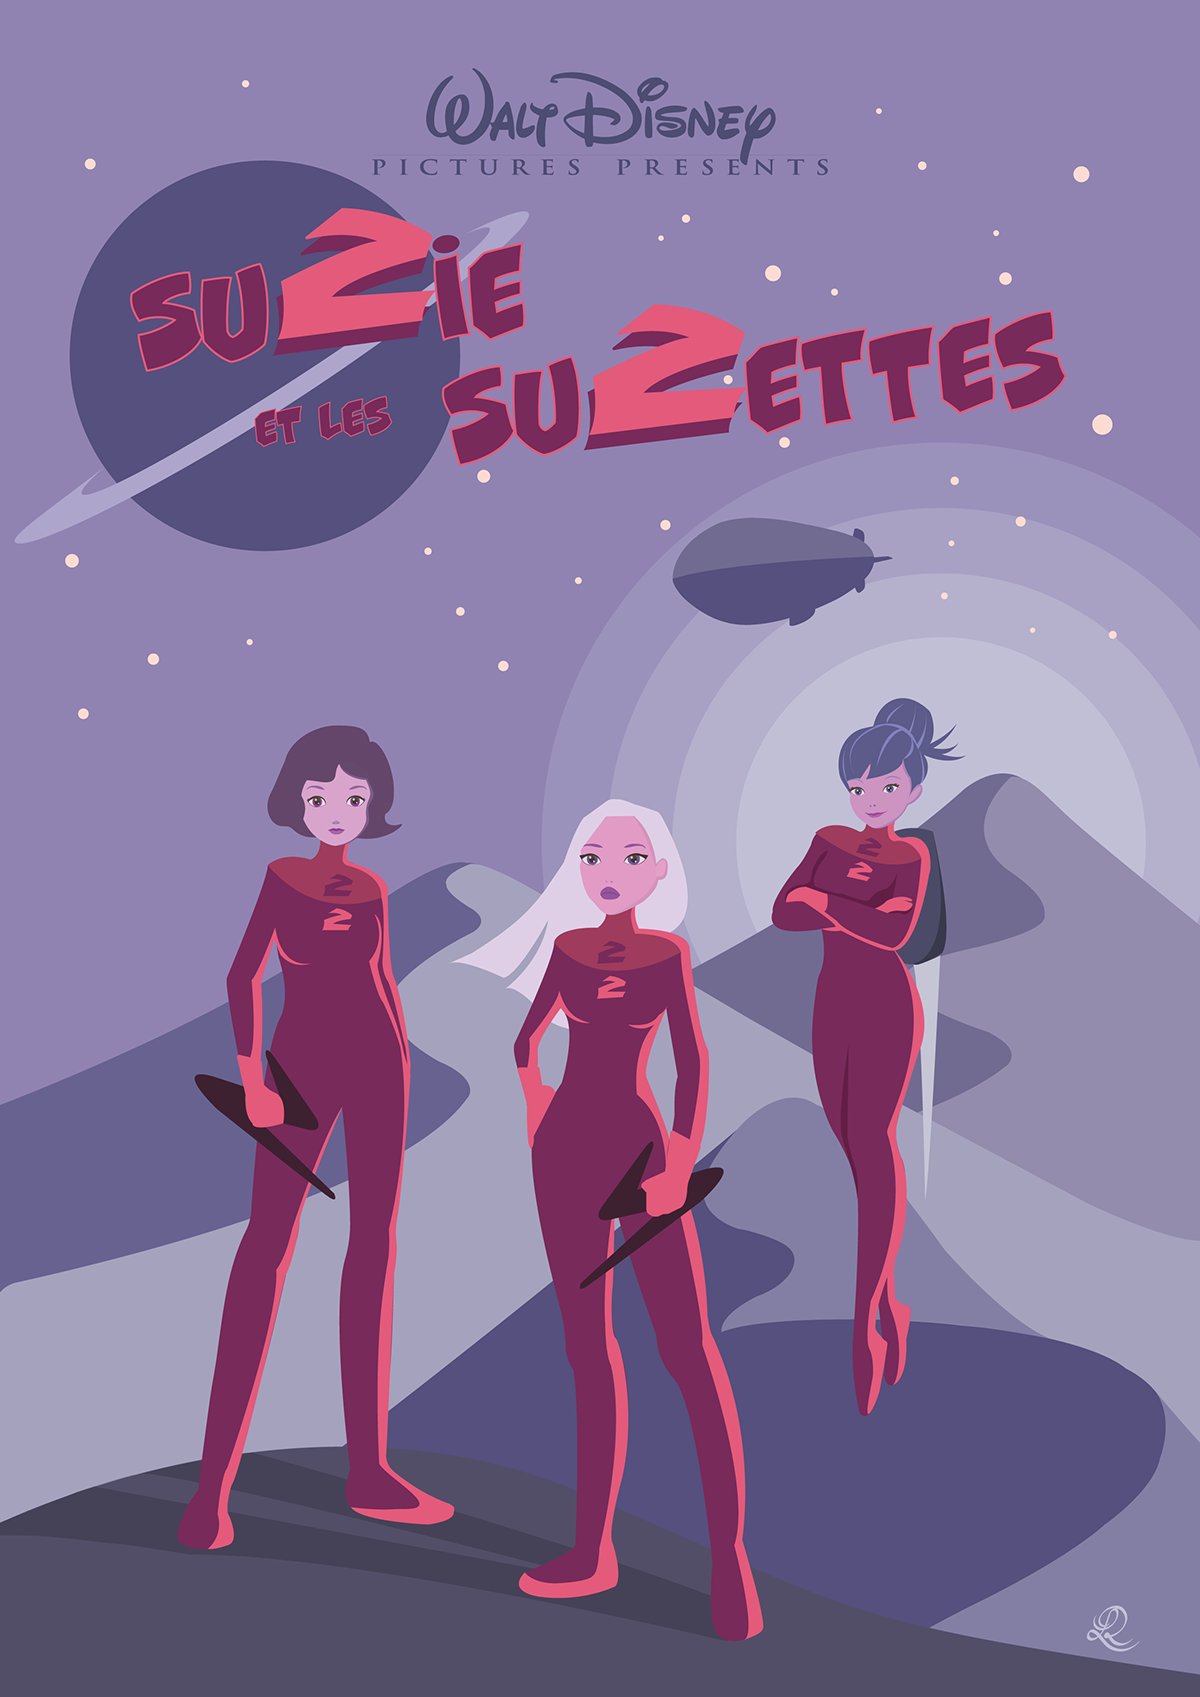 Animated Movie Poster: "Suzie and the Suzettes"
